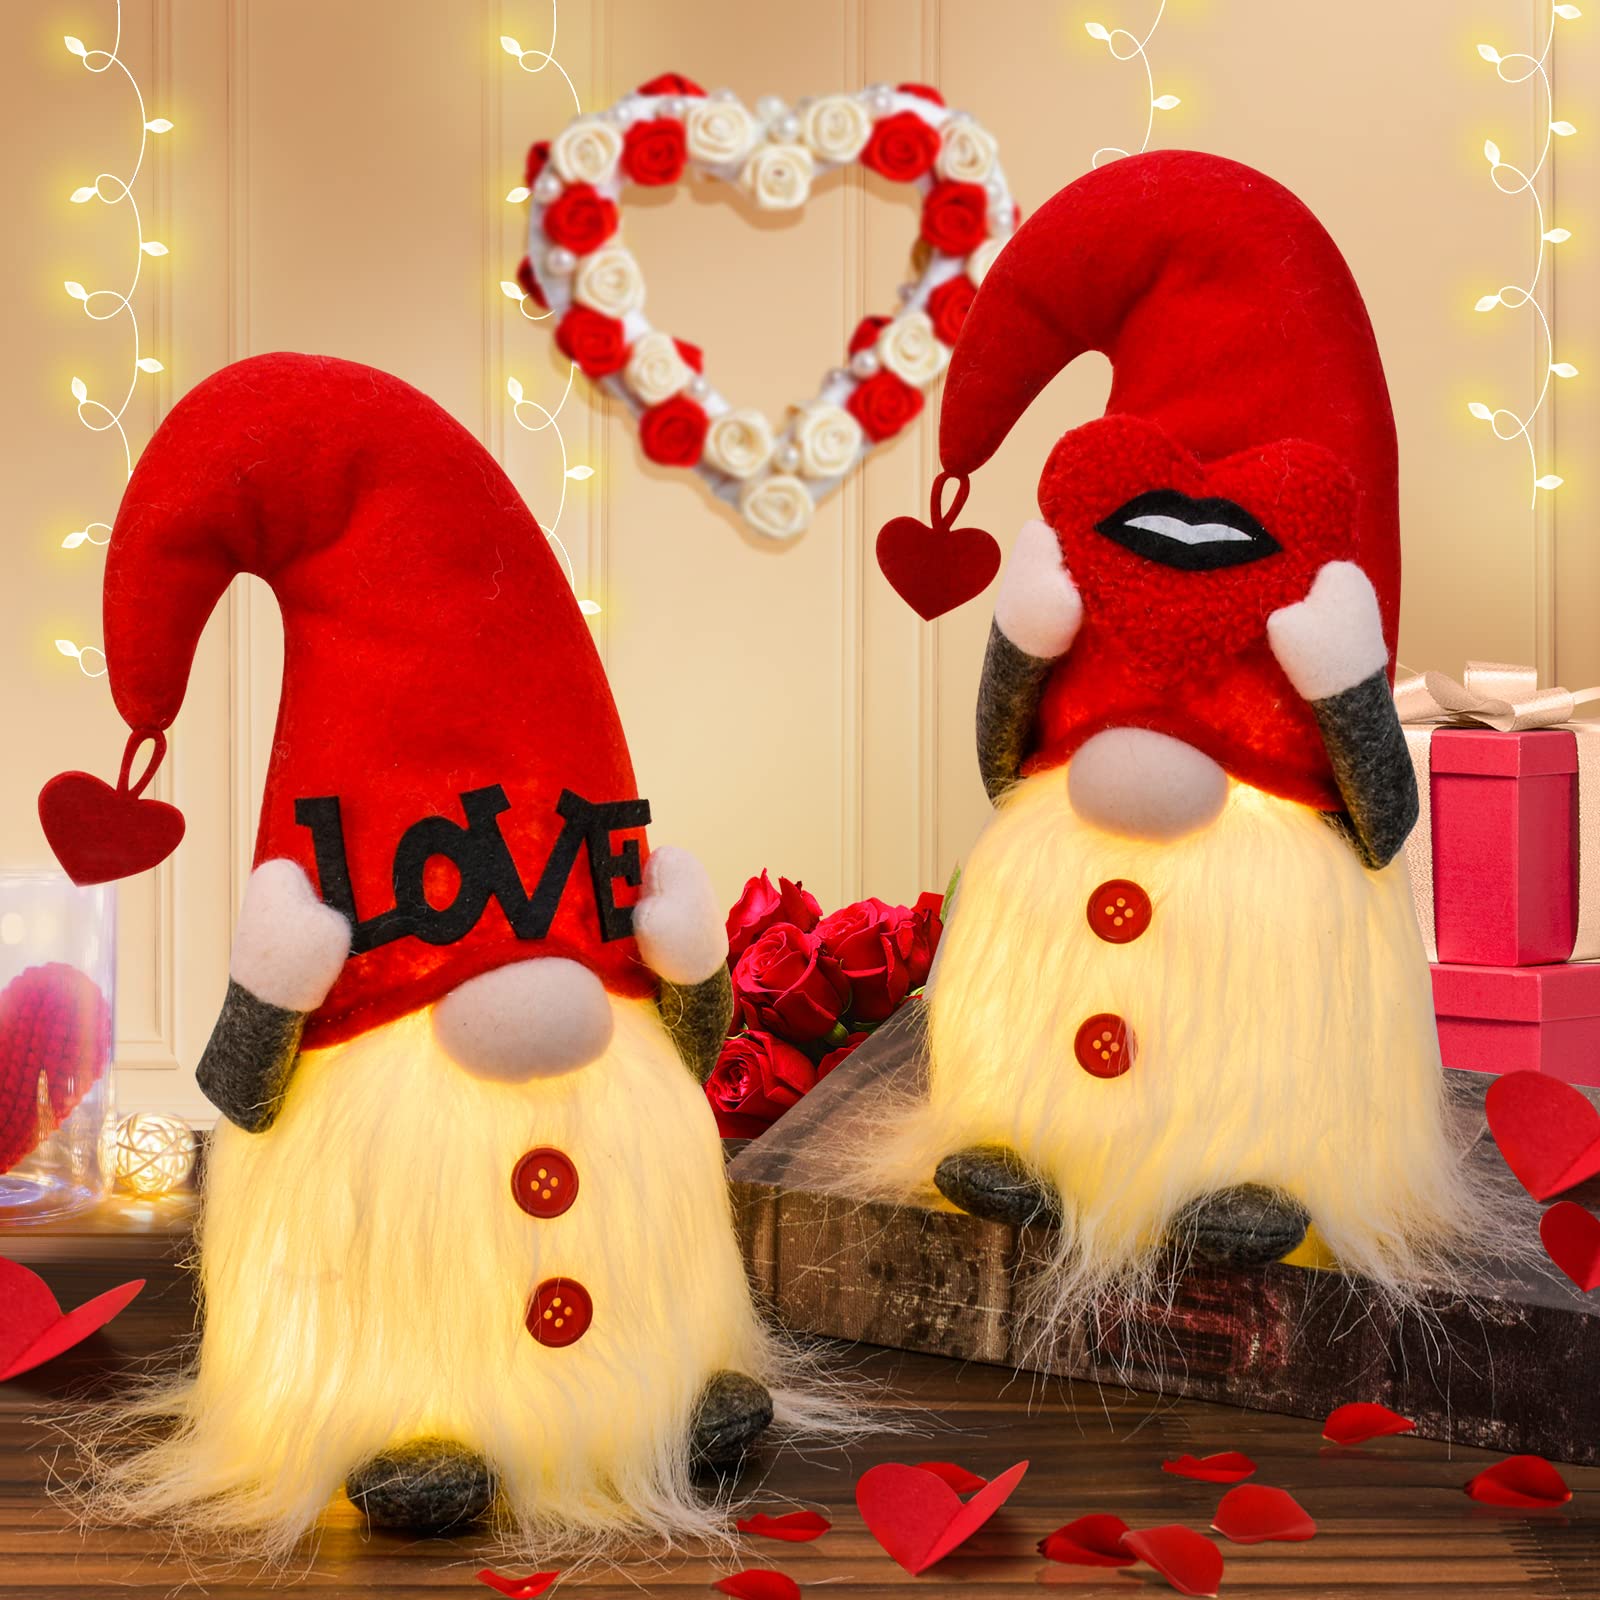 Loving Your Kiss - Adorable Gnome Couple With LED Lights